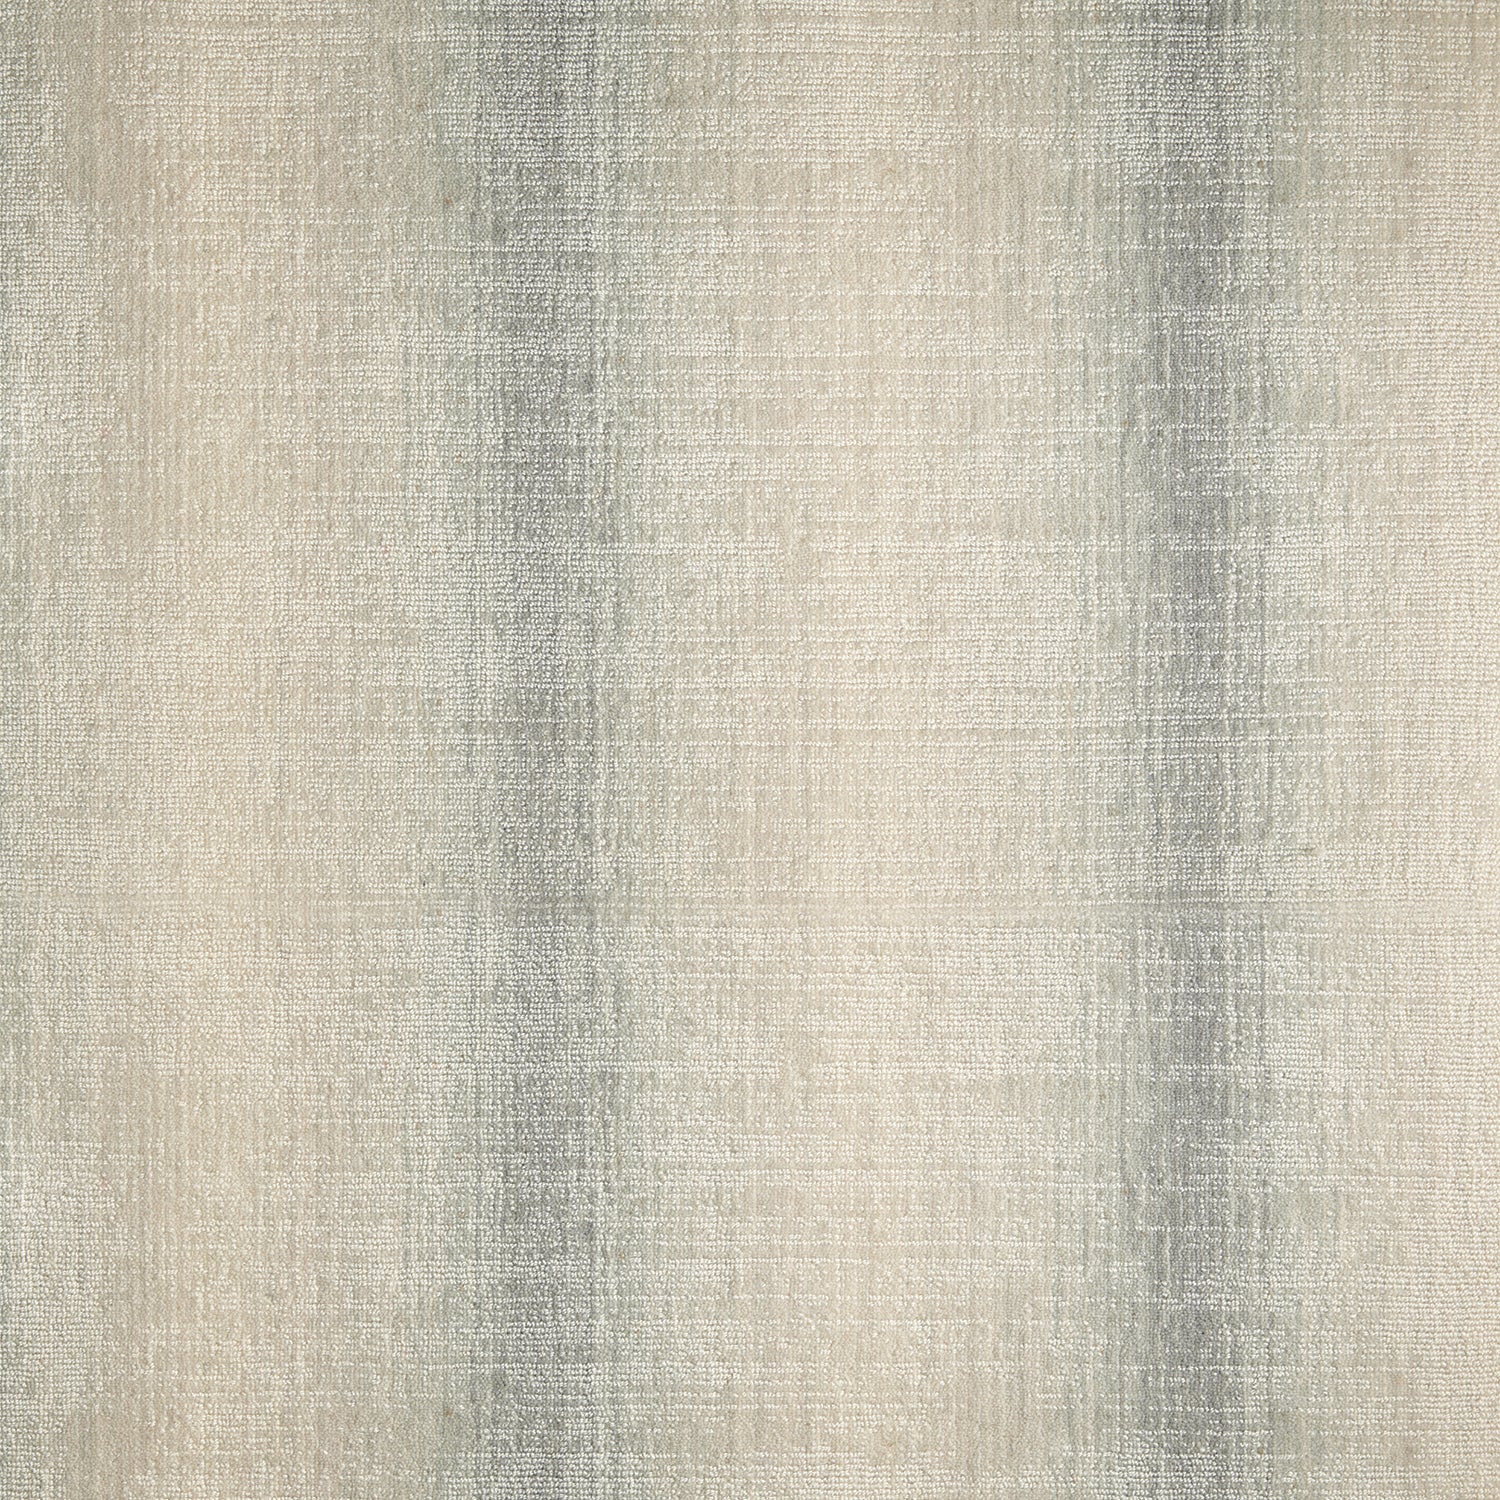 Wool-blend broadloom carpet swatch in an ombré stripe print in shades of cream and gray.